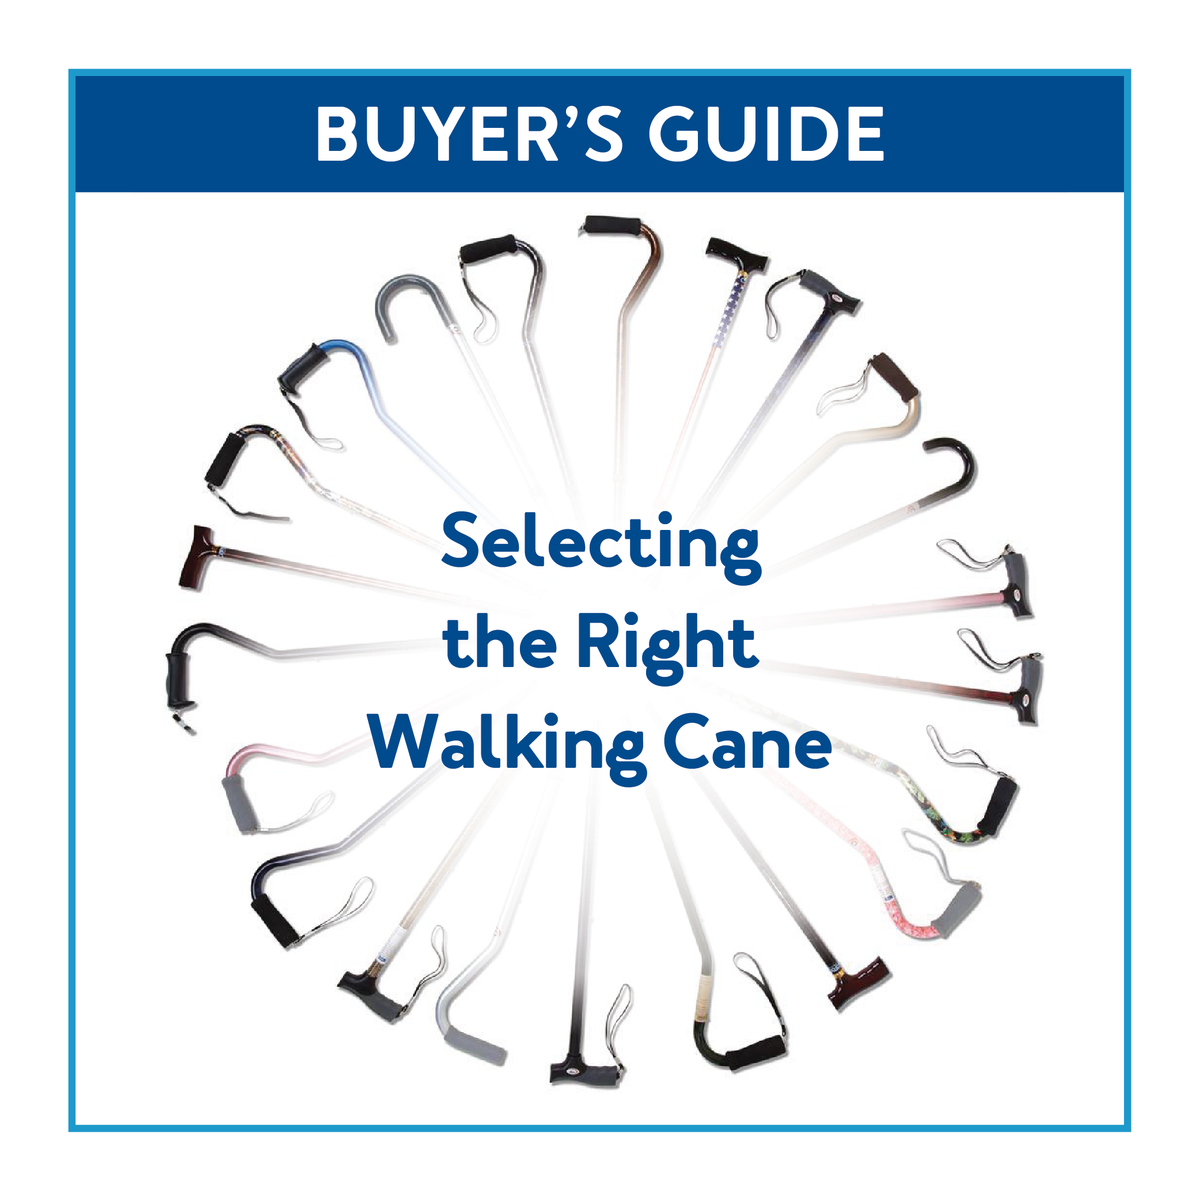 Various walking cane surrounded by a blue border with text Buyer’s Guide: Selecting the Right Walking Cane